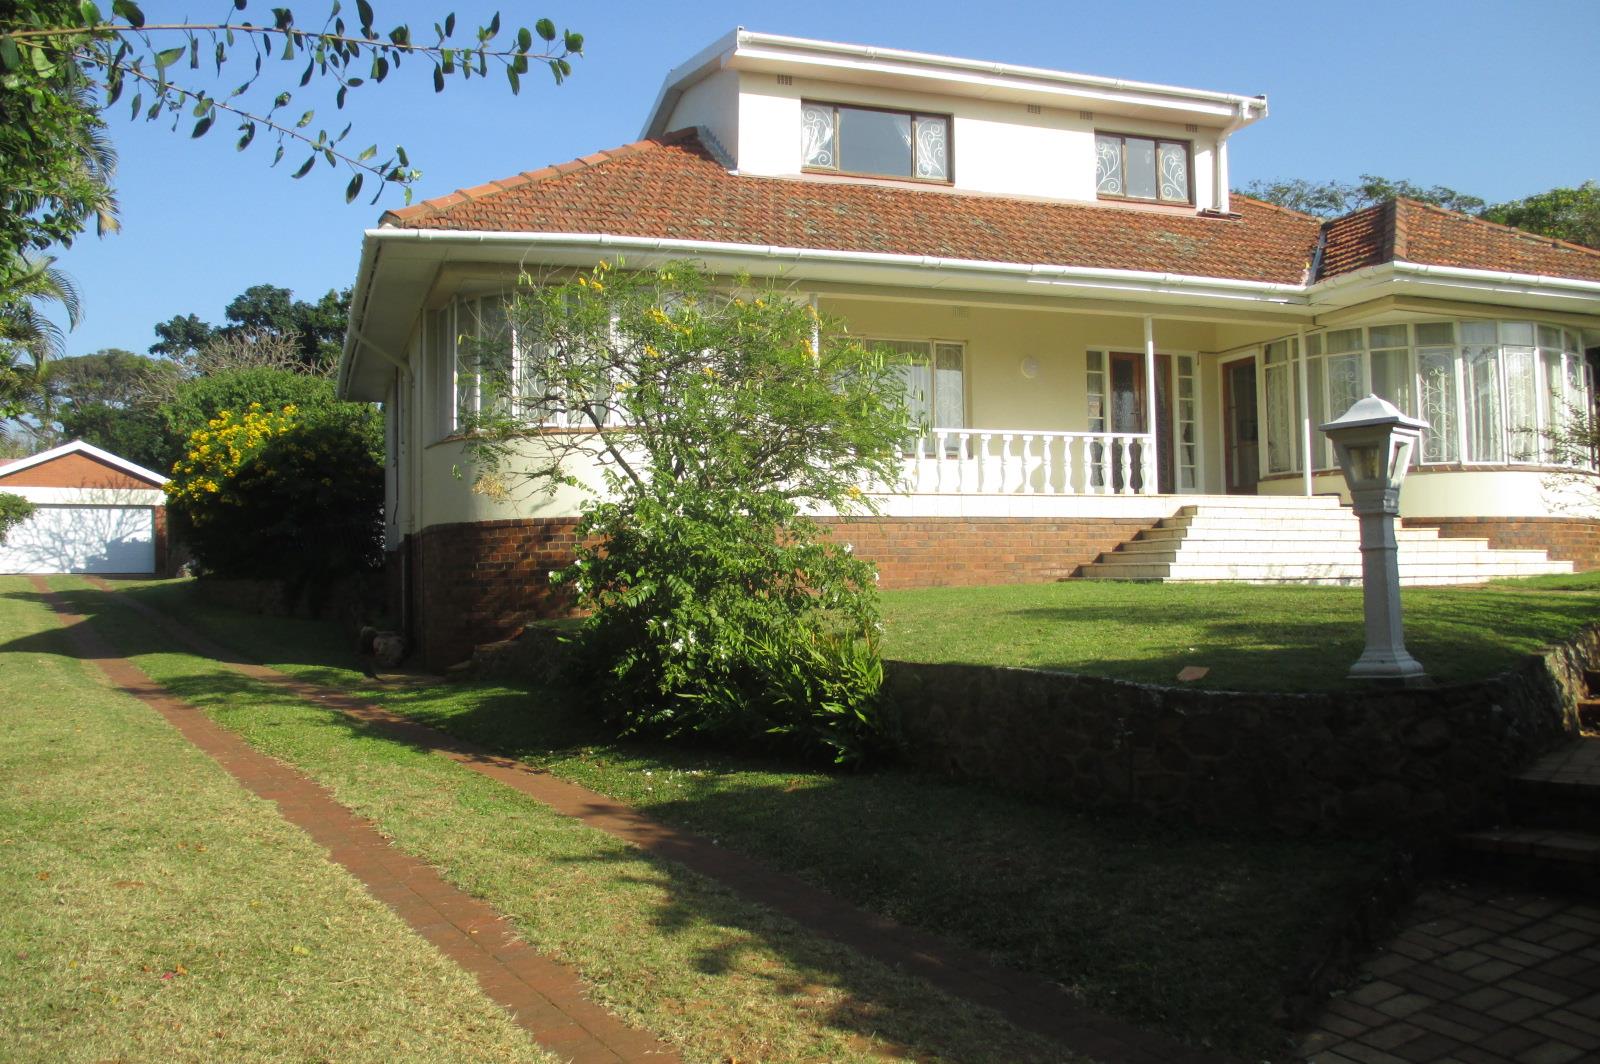 5 Bedroom House For Sale in Durban North | RE/MAX™ of Southern Africa